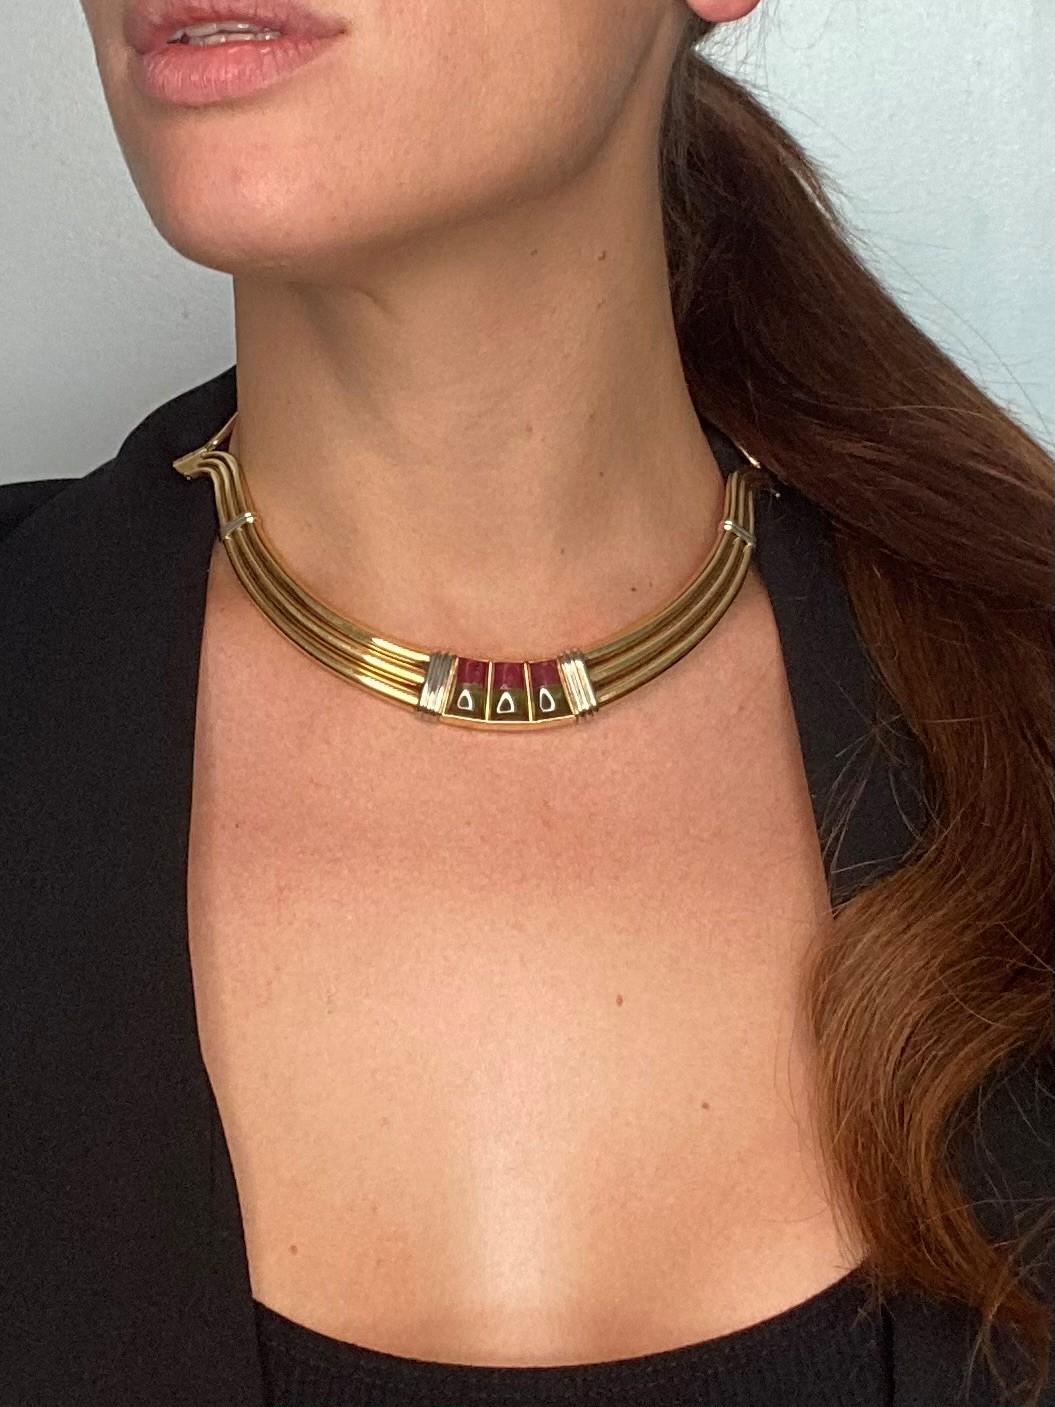 Gucci 1970 Milan Very Rare Choker Necklace 18Kt Gold 16.02 Cts in Tourmaline 2